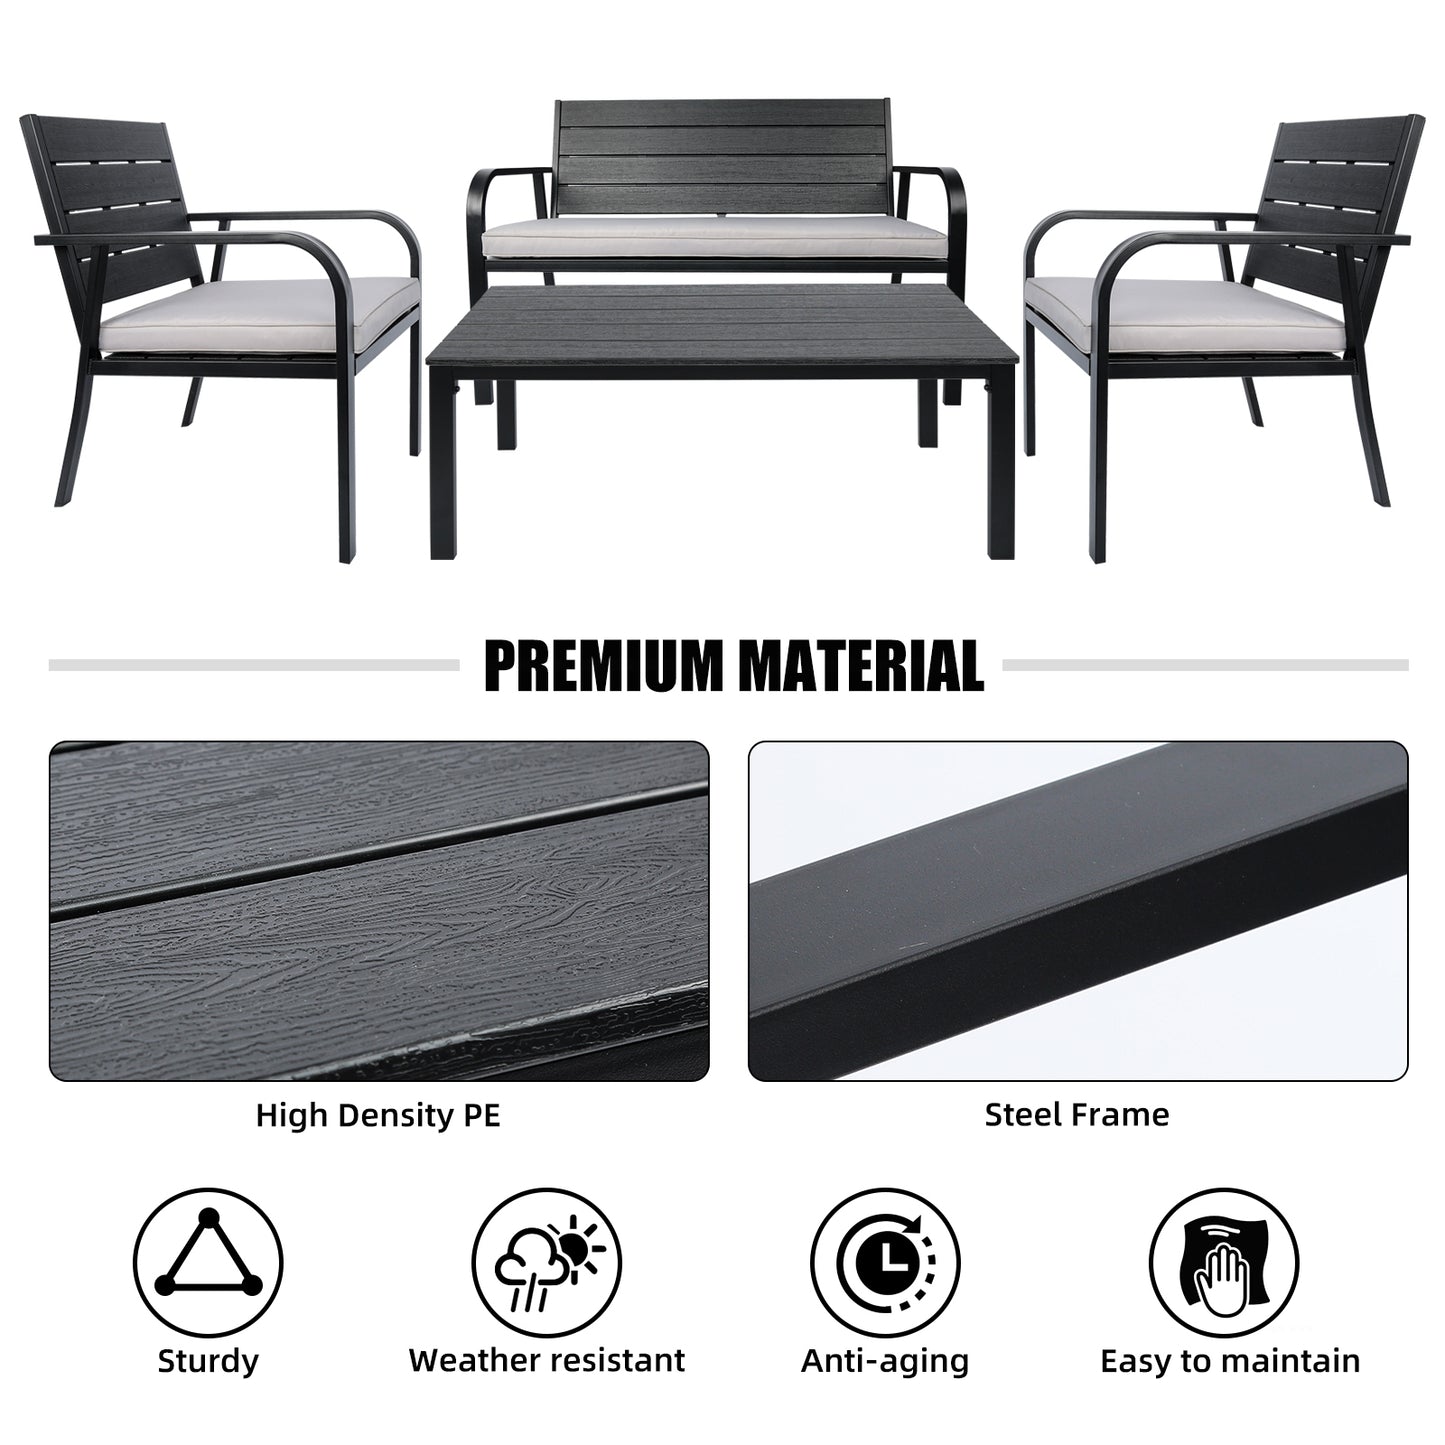 4 Pieces Outdoor Seating Set (black)